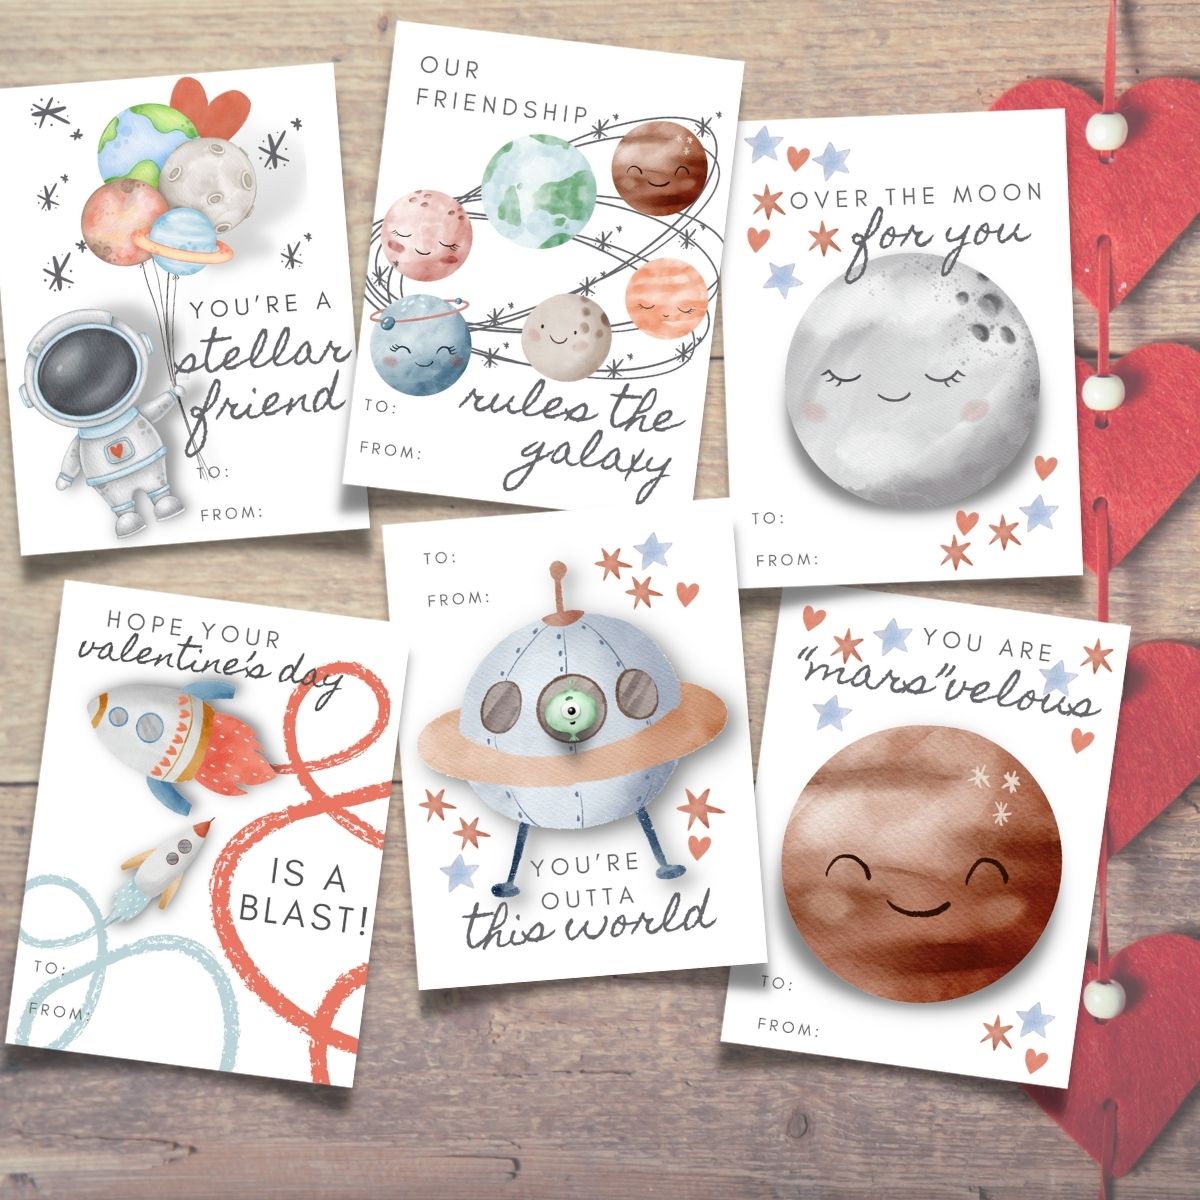 I am so excited to share these space-themed valentine cards, tags, and bag toppers with all of you! They are designed with a rocket ship or two, the solar system, an astronaut and an alien and his spaceship. These are beautiful watercolor images, not so much silly outer space, so even if you have older girls and boys who are into all things space these will be perfect!